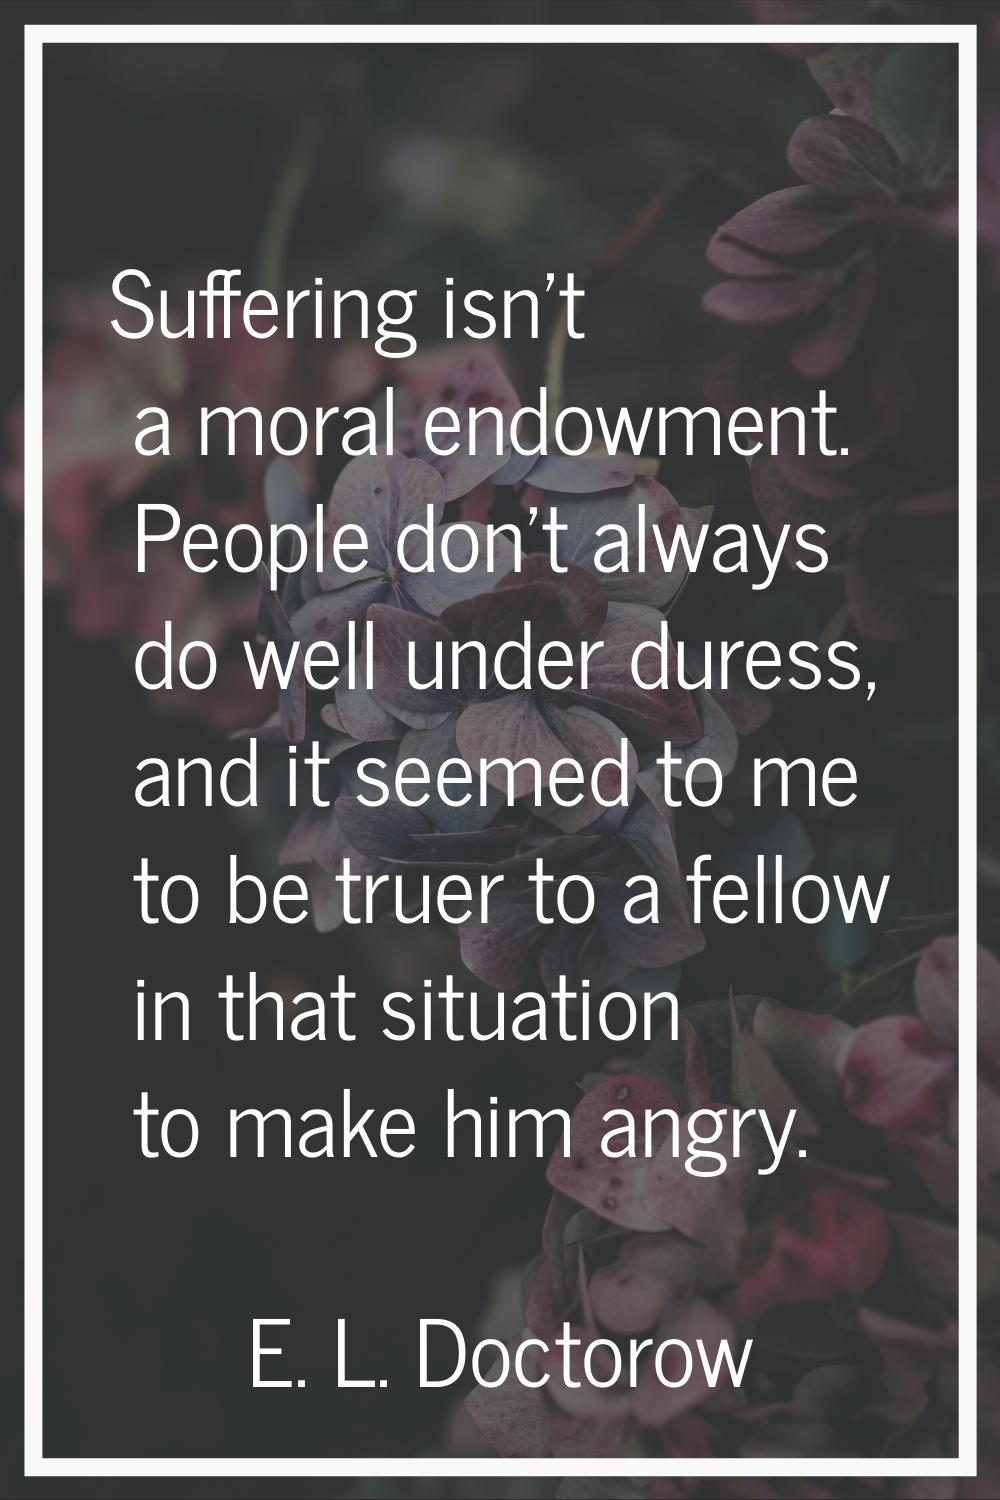 Suffering isn't a moral endowment. People don't always do well under duress, and it seemed to me to